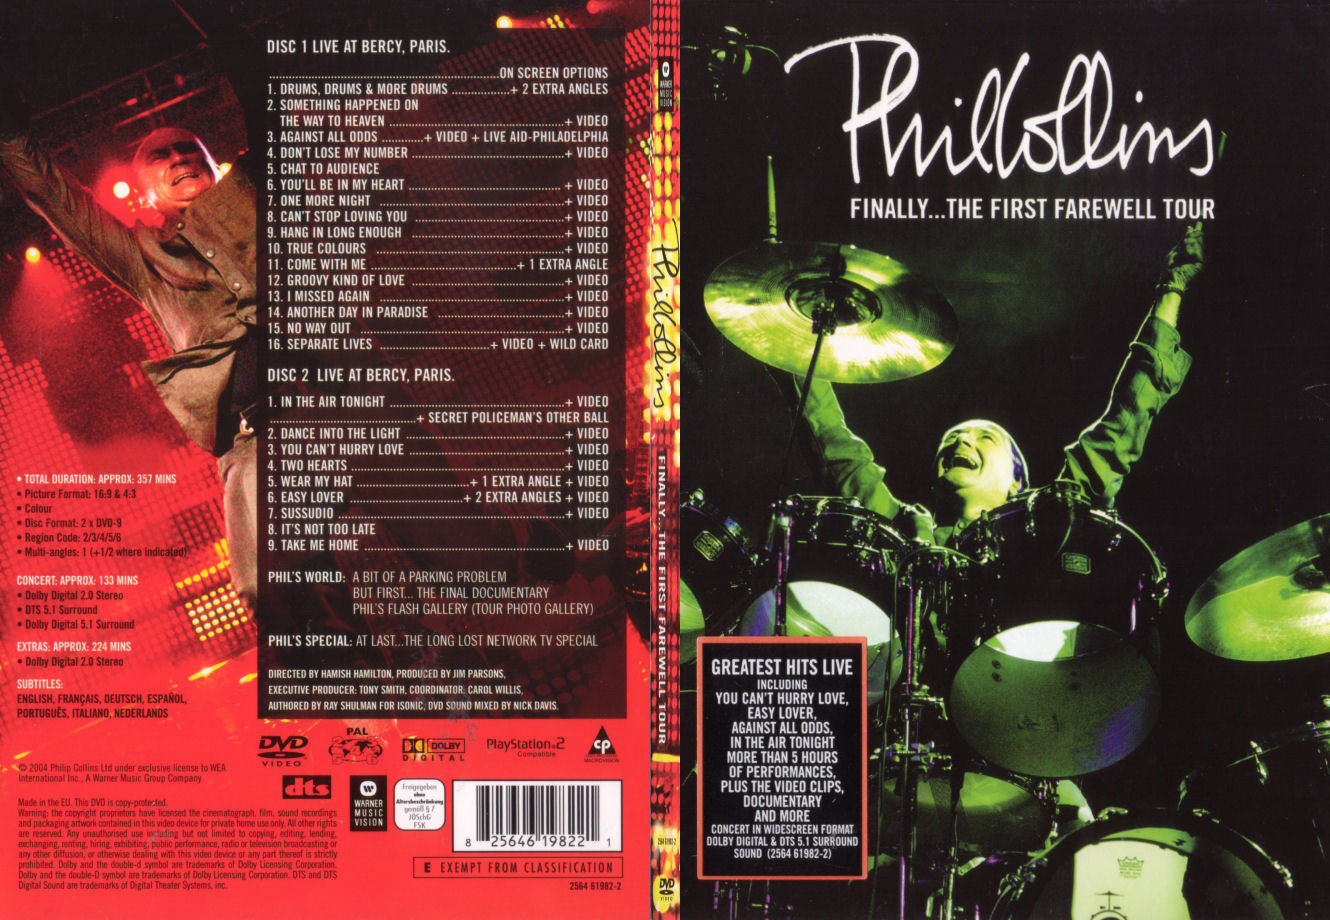 Jaquette DVD Phil Collins Finally the first farewell tour - SLIM